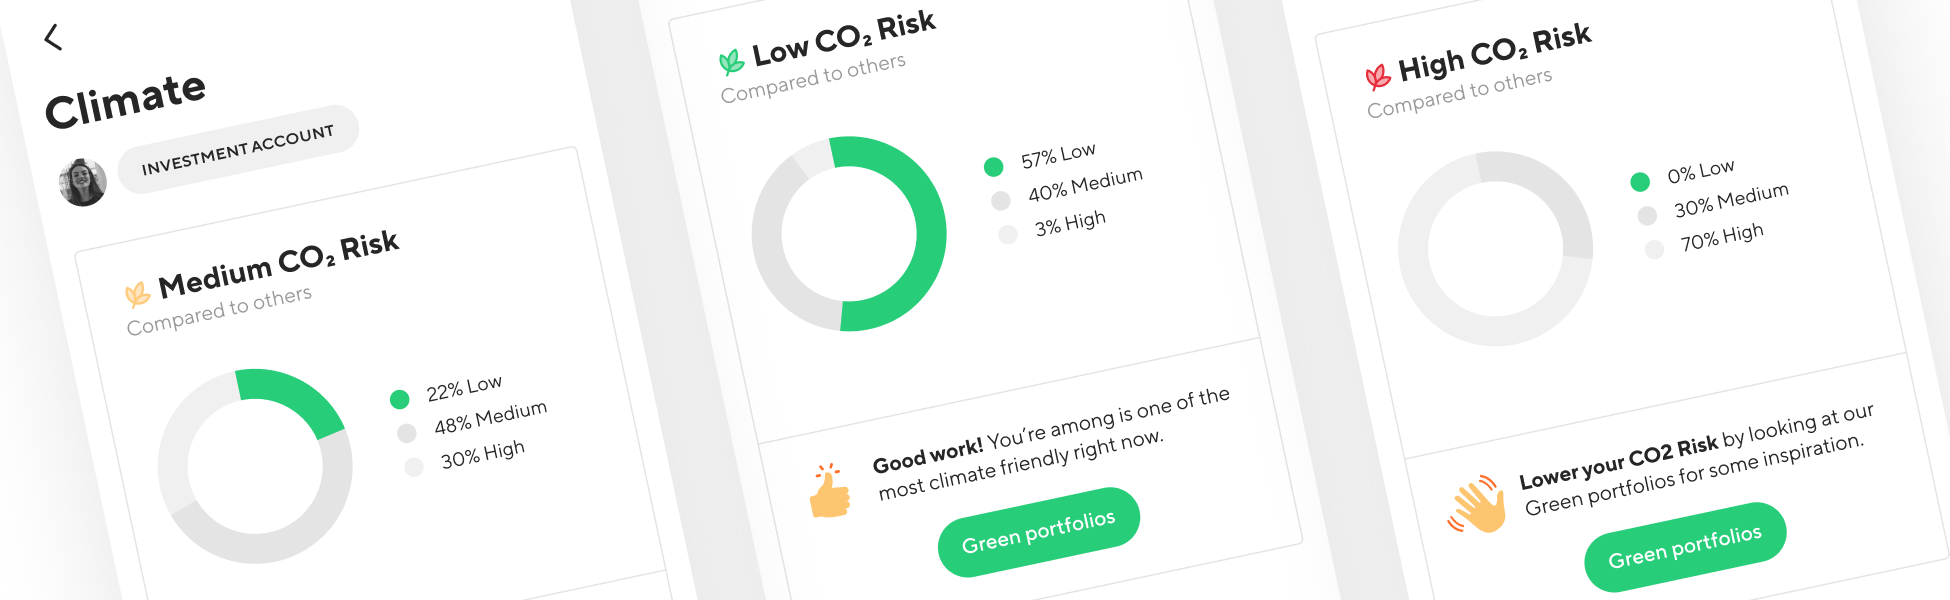 The StockRepublic API offers a climate analysis and assessment of CO2 risks